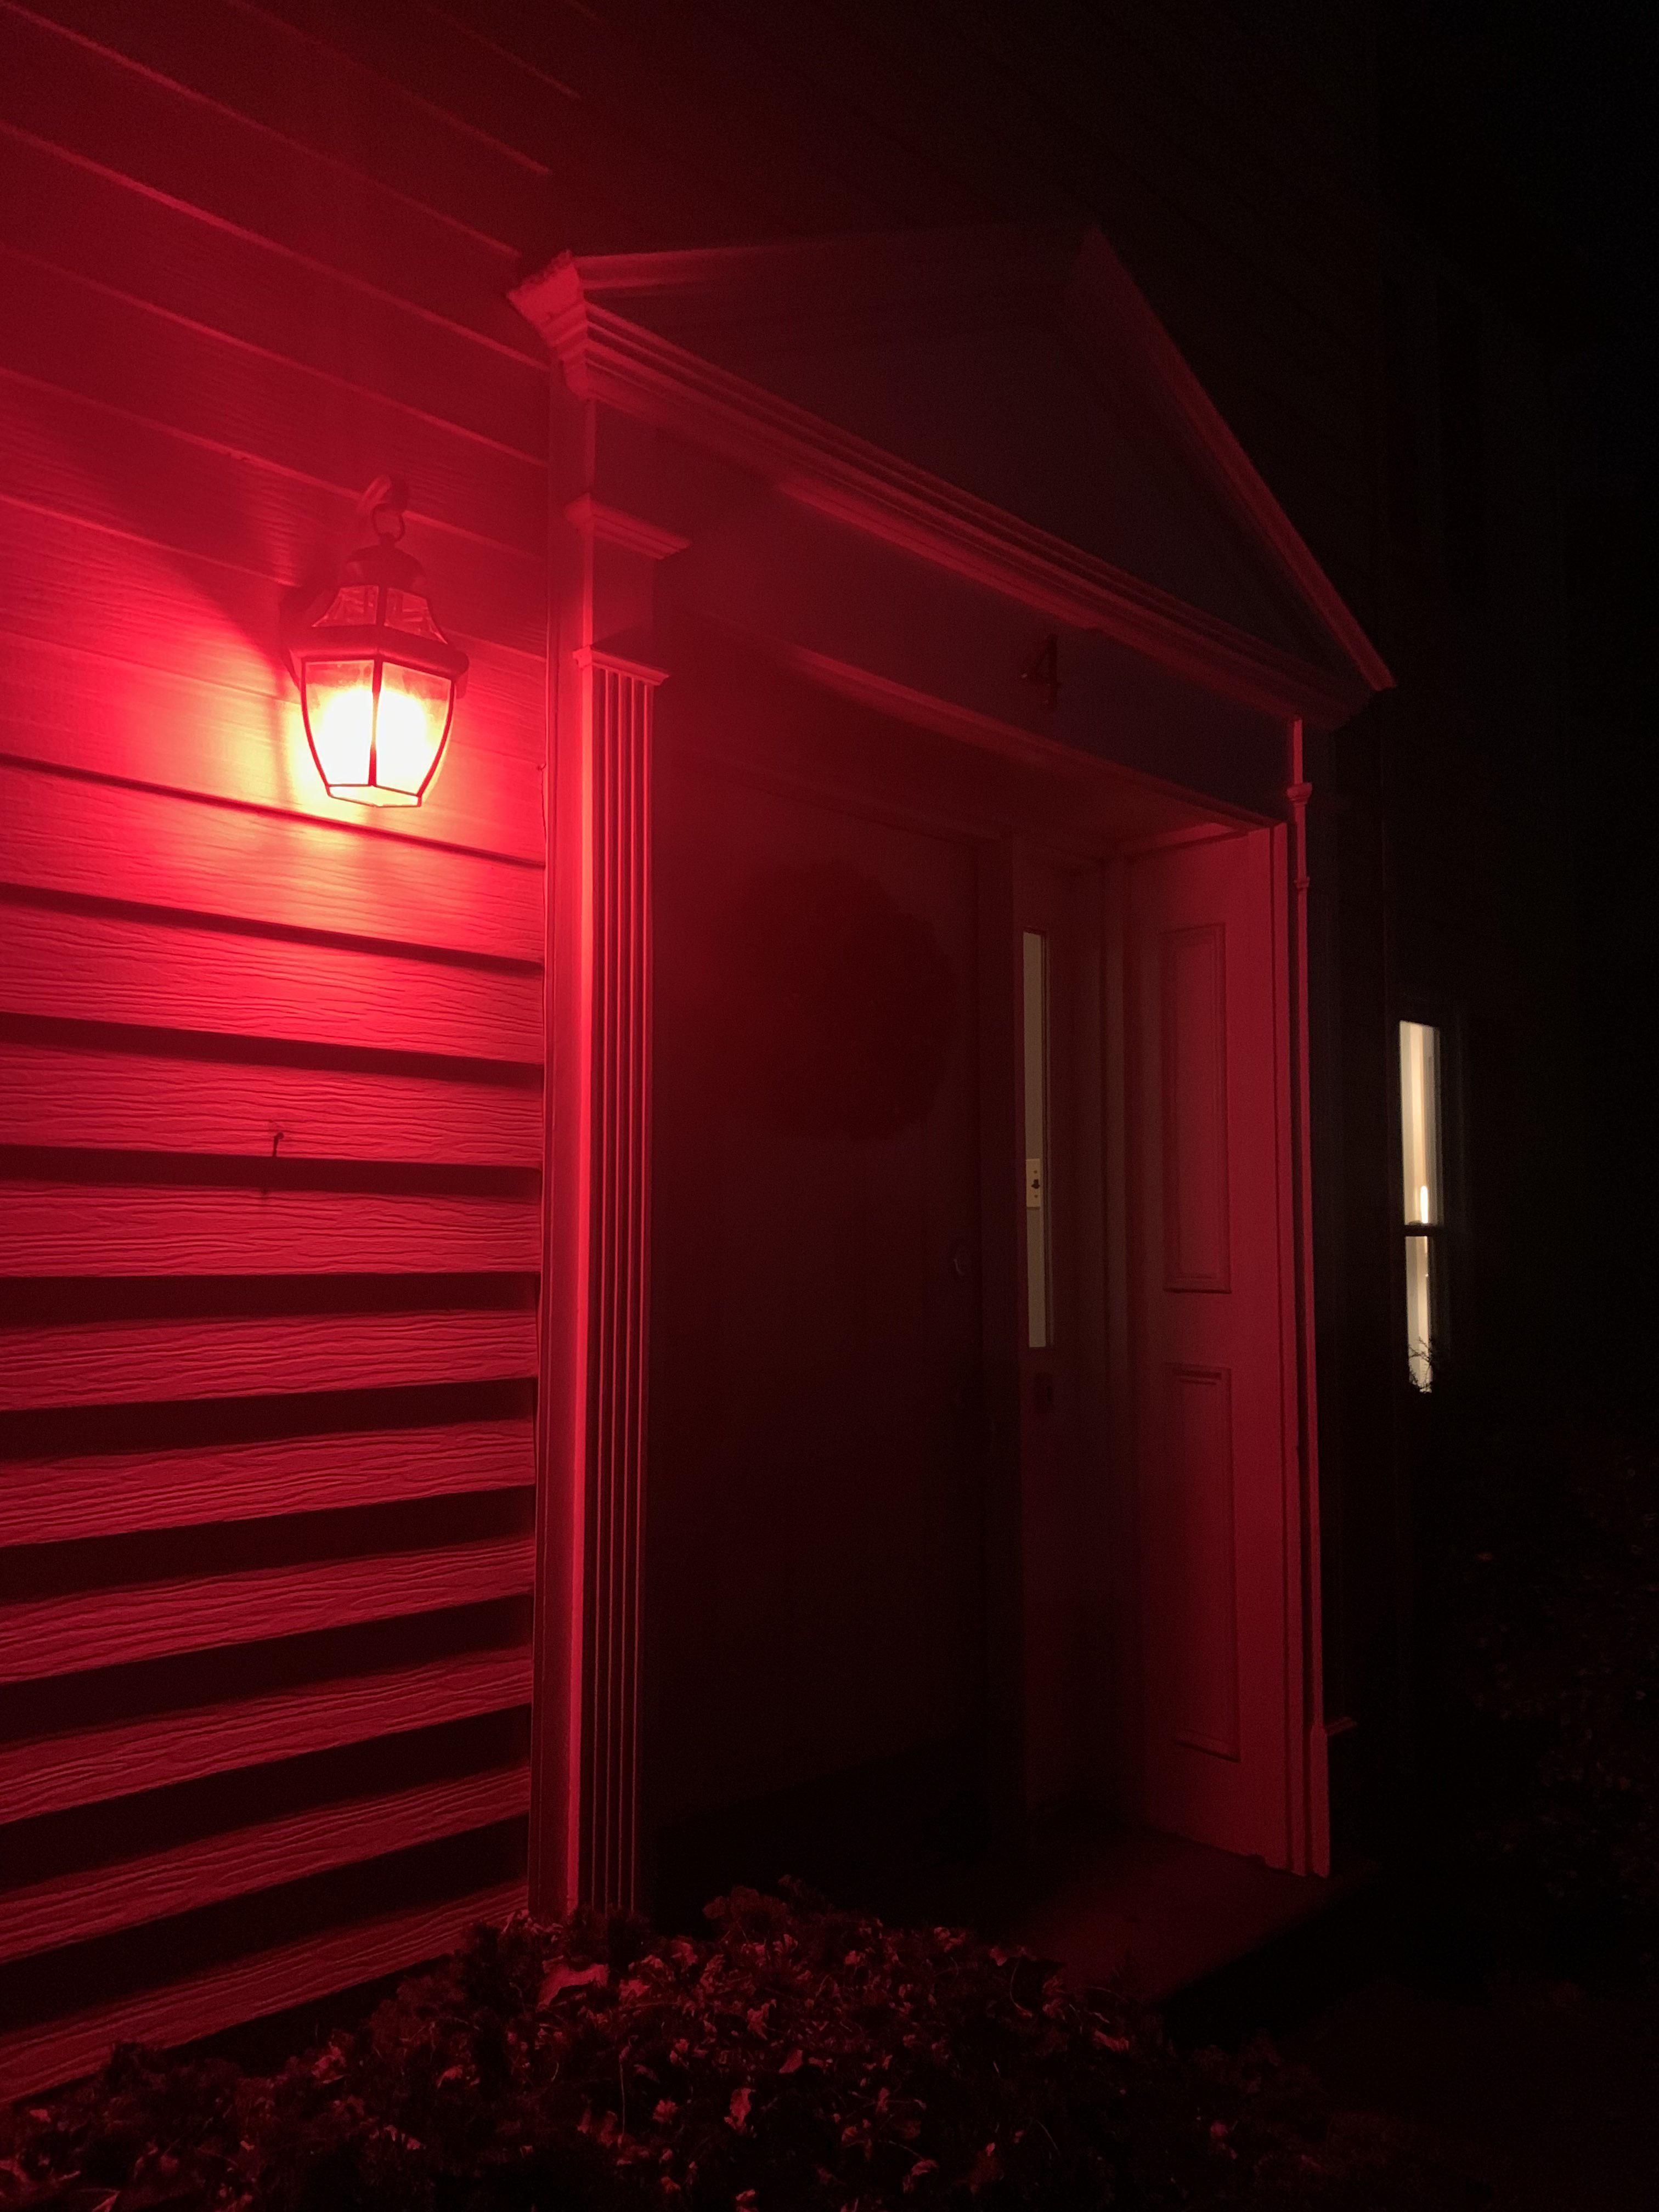 Wife wanted holiday-colored porch lights. She’s not loving her new name - Roxanne.